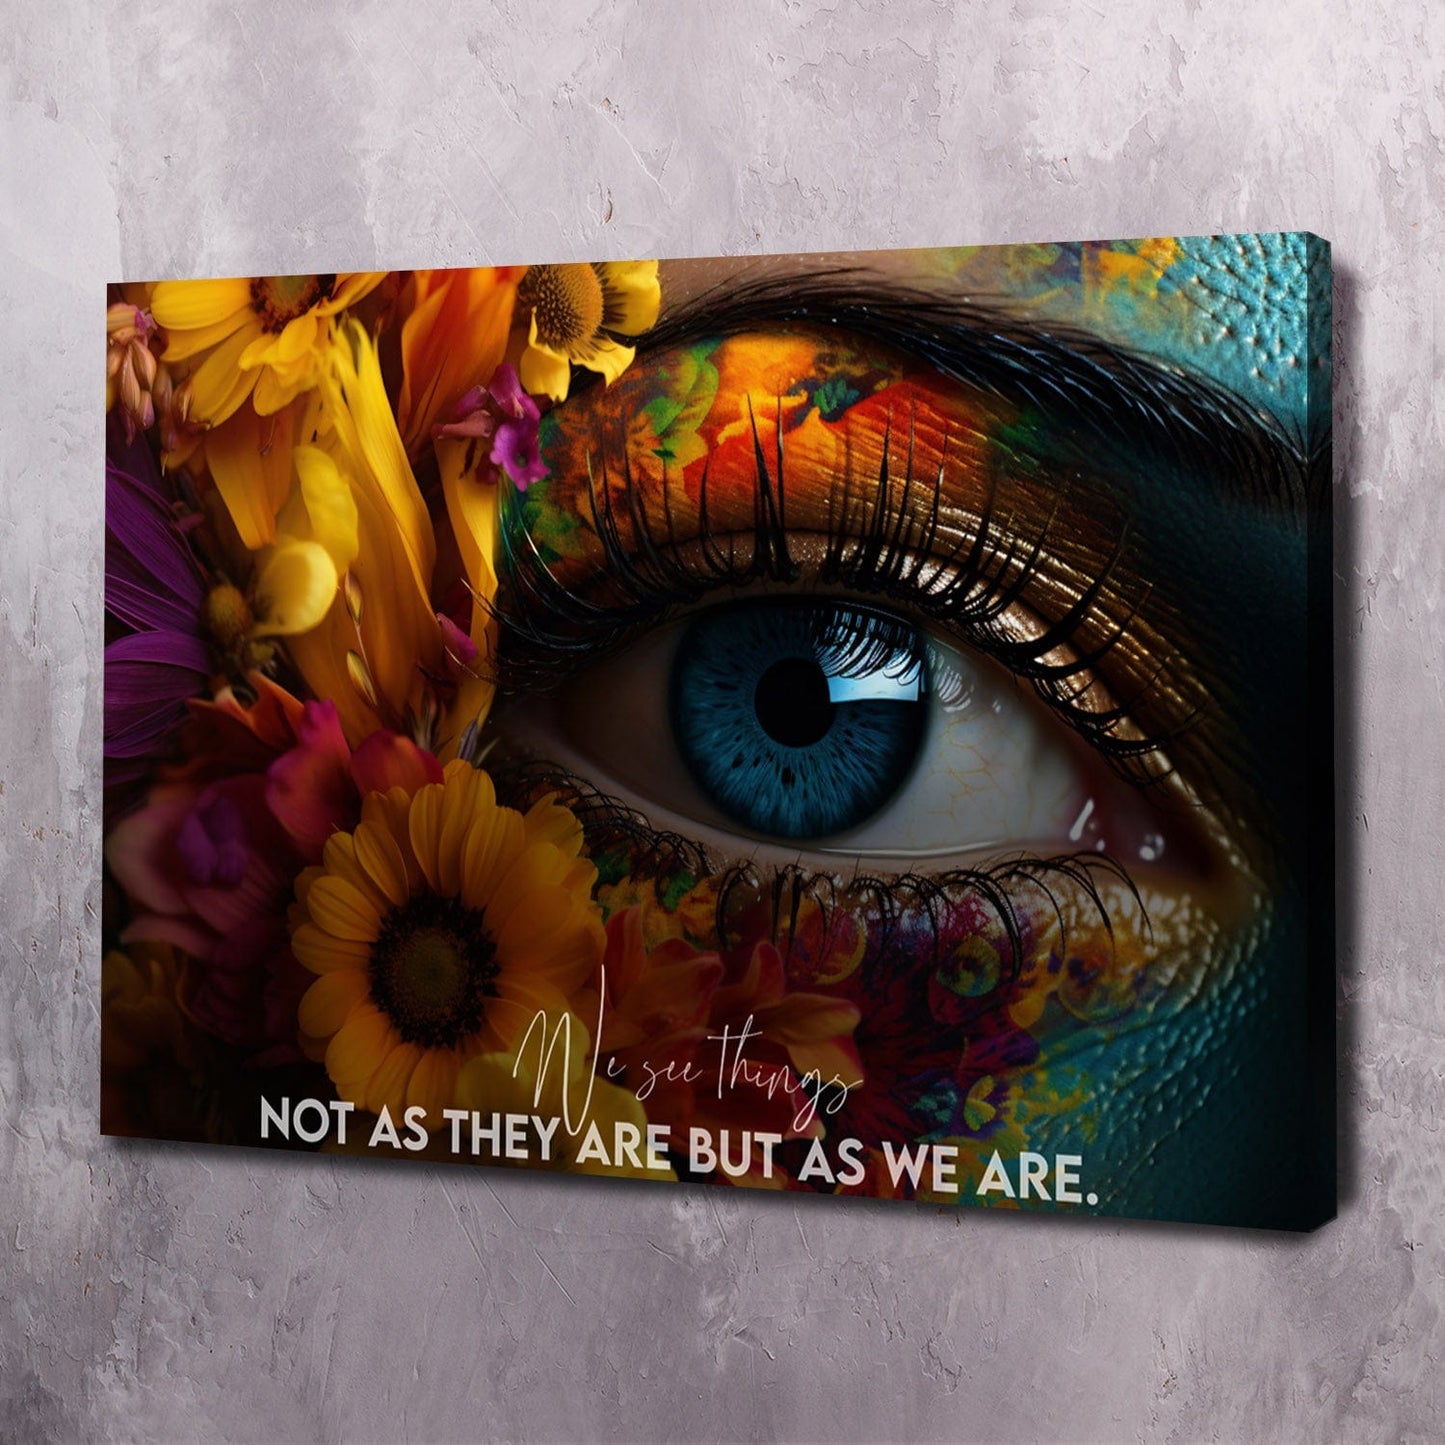 We See Things Not as They Are But as We Wall Art | Inspirational Wall Art Motivational Wall Art Quotes Office Art | ImpaktMaker Exclusive Canvas Art Landscape